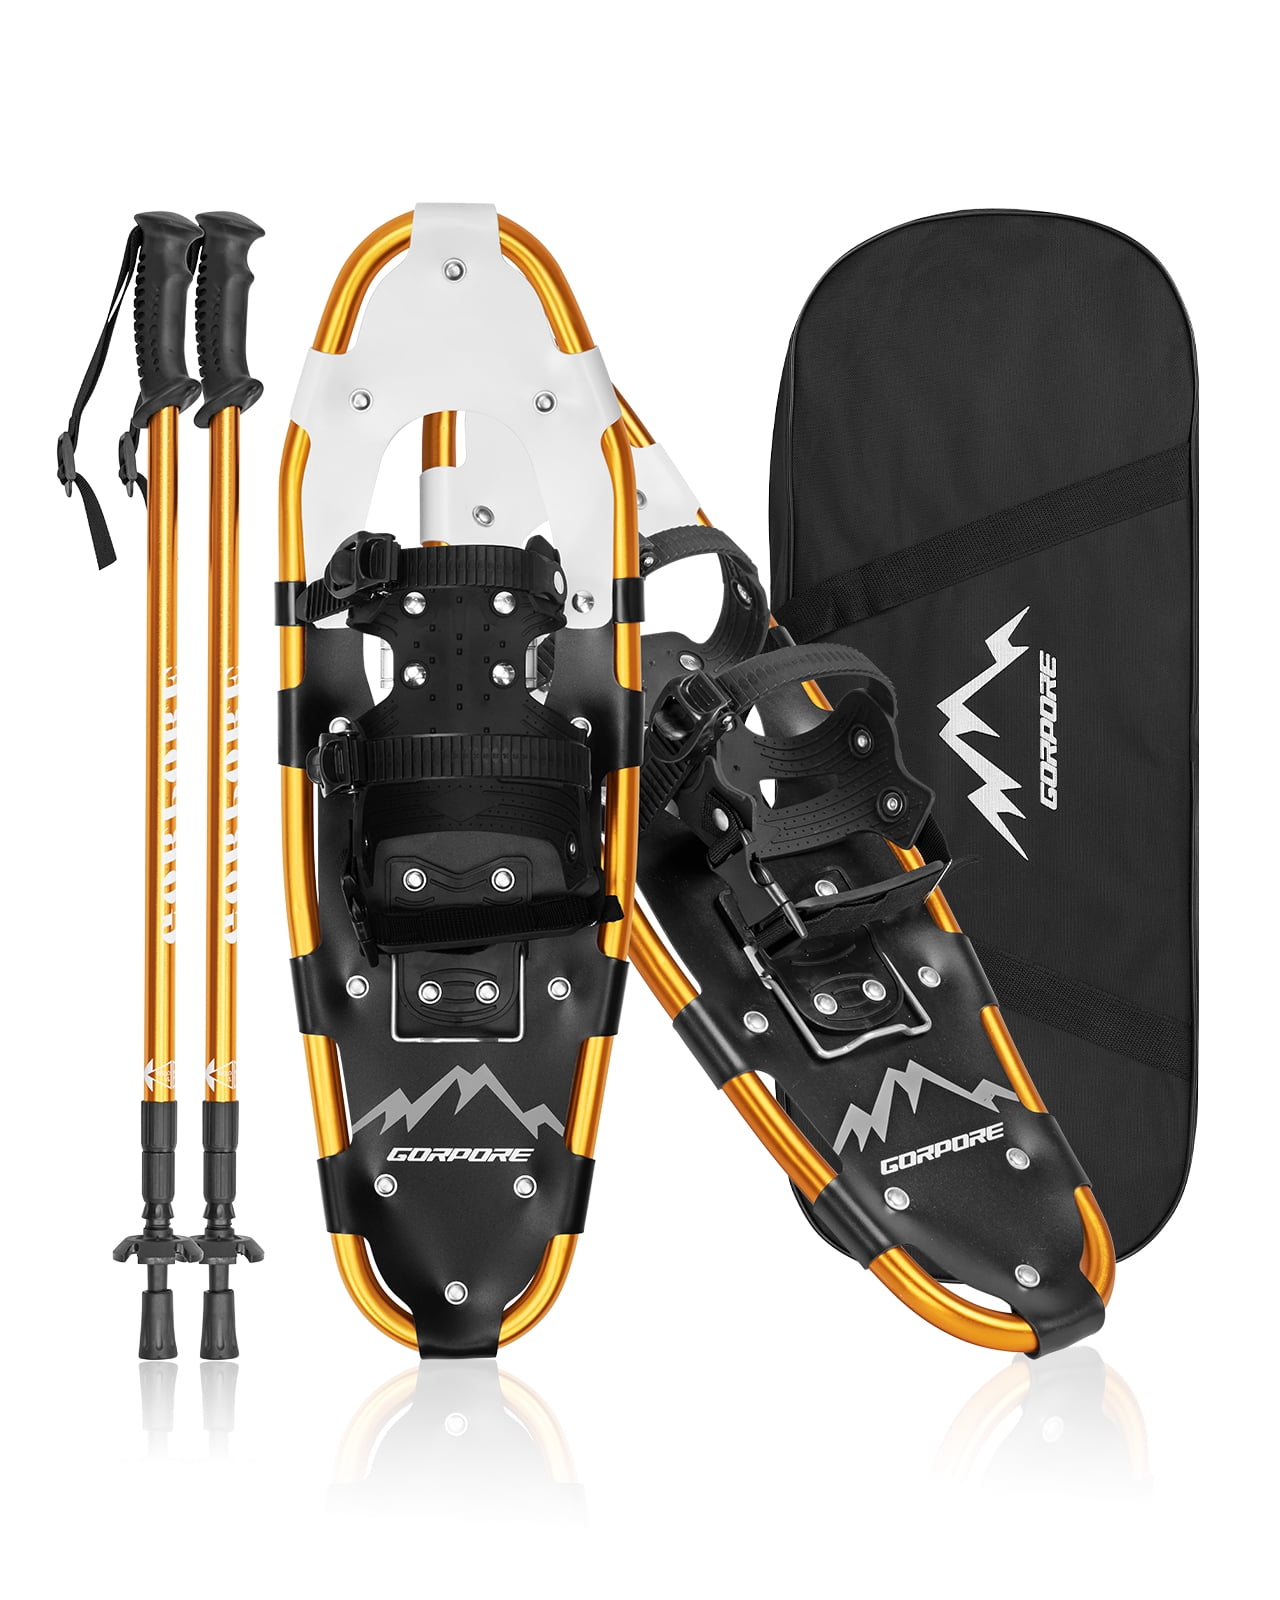 INHE Heel Lift Design 21/25/27/30 Inches Snow Shoes for Women Men Girls Boys Kids Aluminum Terrain Lightweight Snowshoes with Trekking Poles and Carrying Tote Bag 